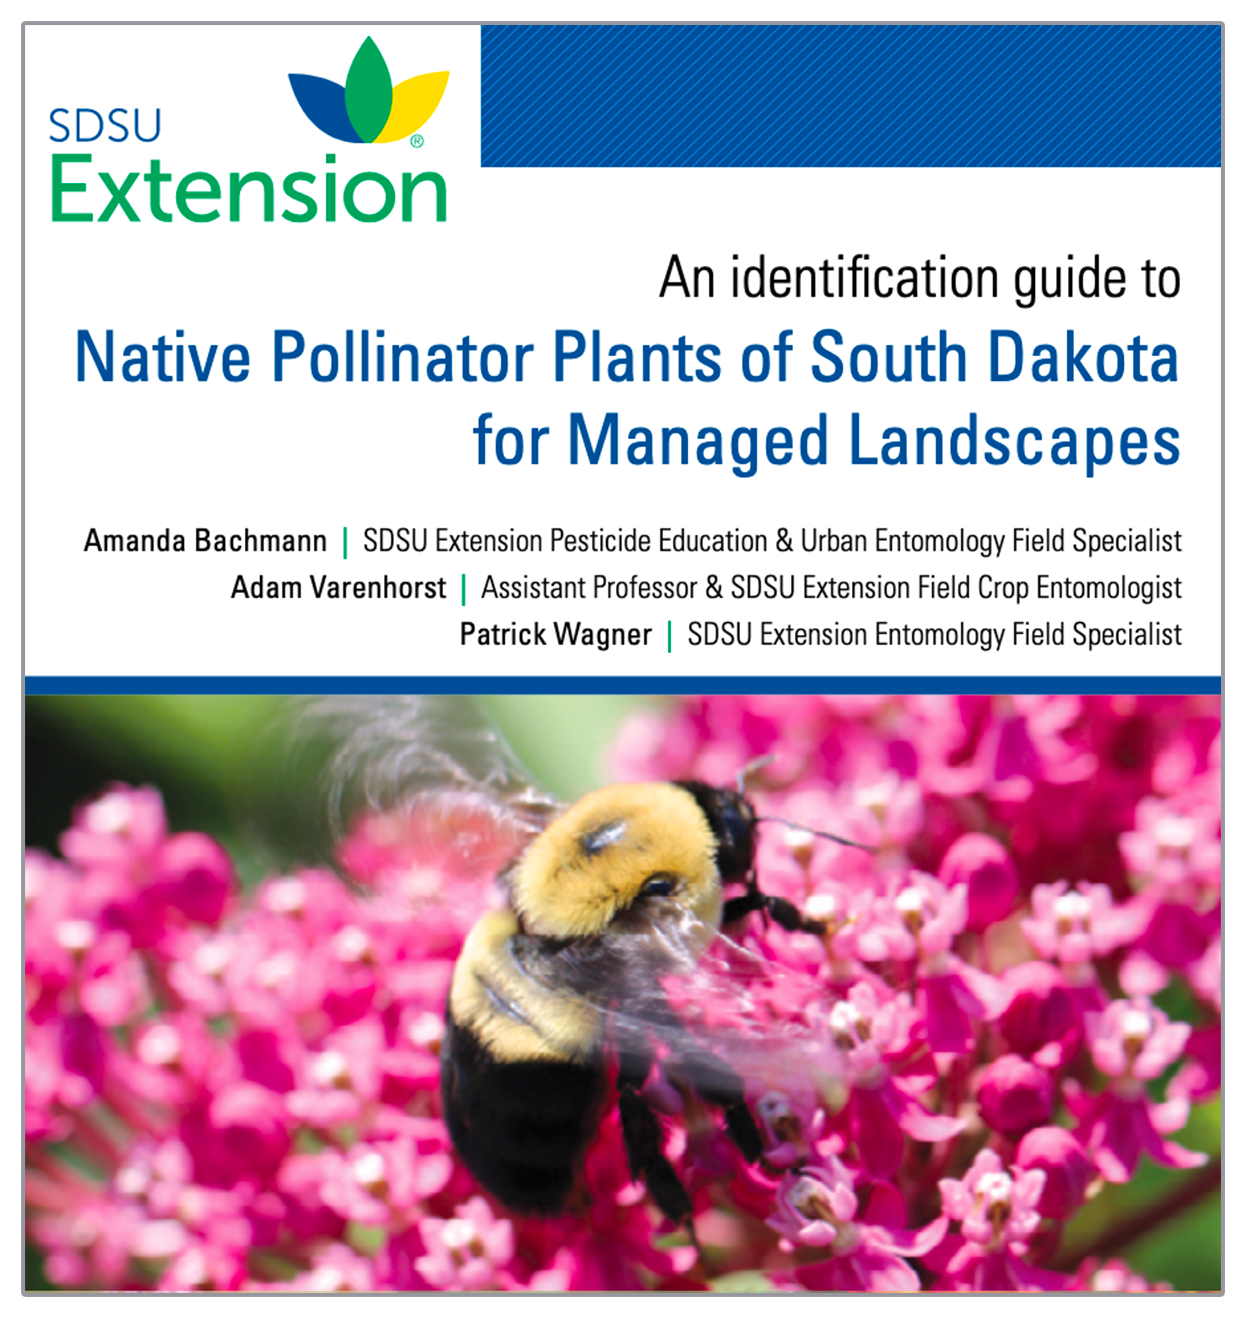 Cover of the SDSU Extension publication, "o	An Identification Guide to Native Pollinator Plants of South Dakota for Managed Landscapes."